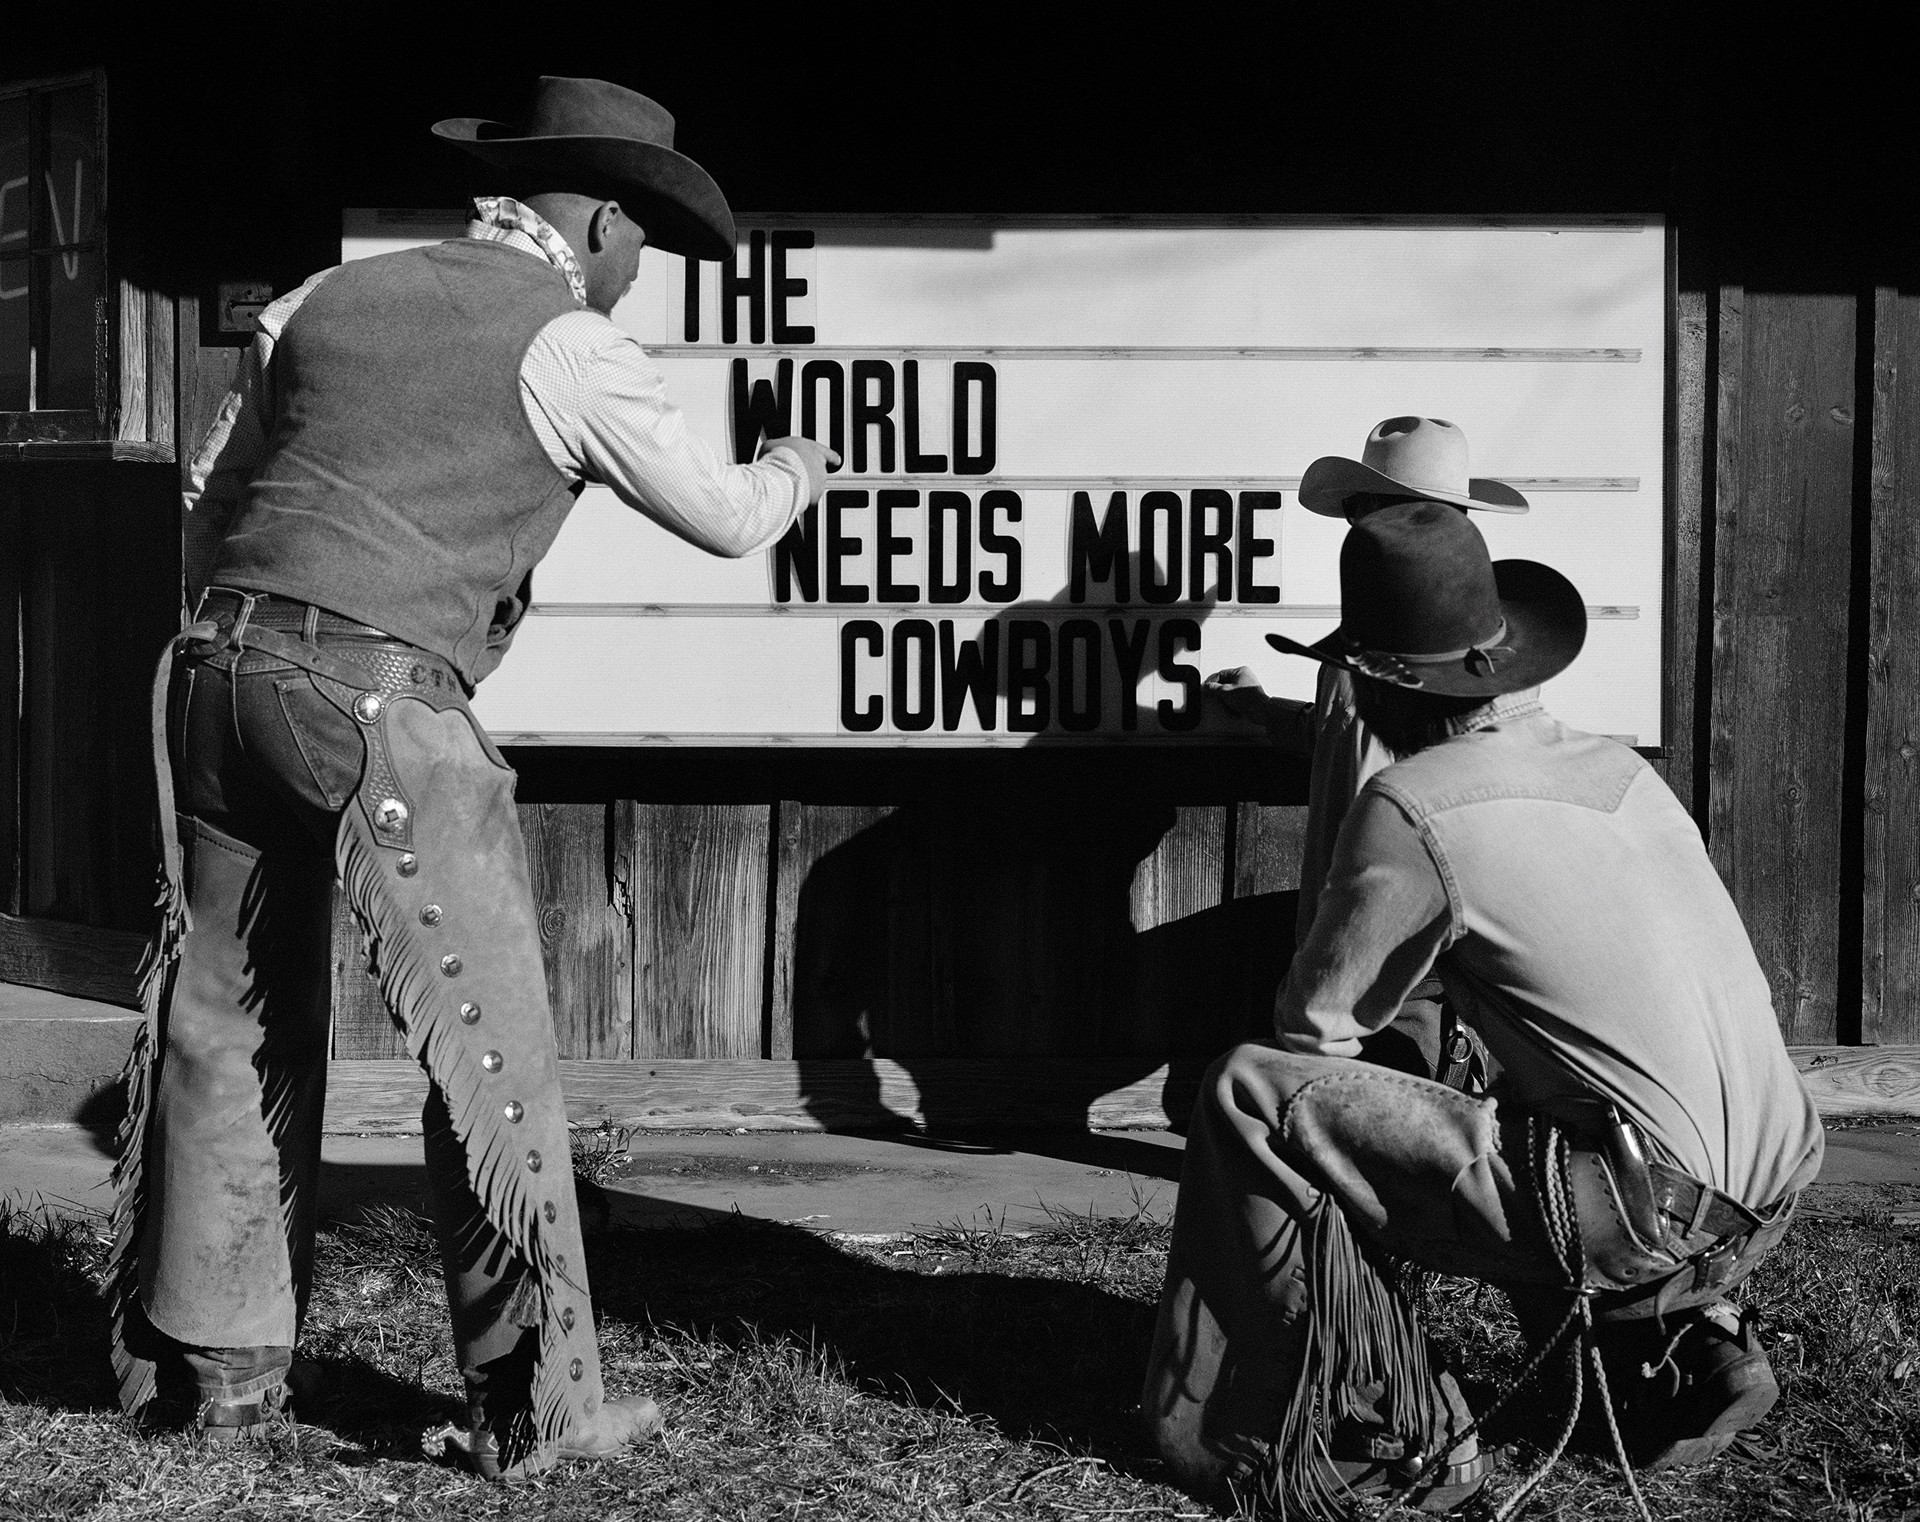 The World Needs More Cowboys by Beau Simmons